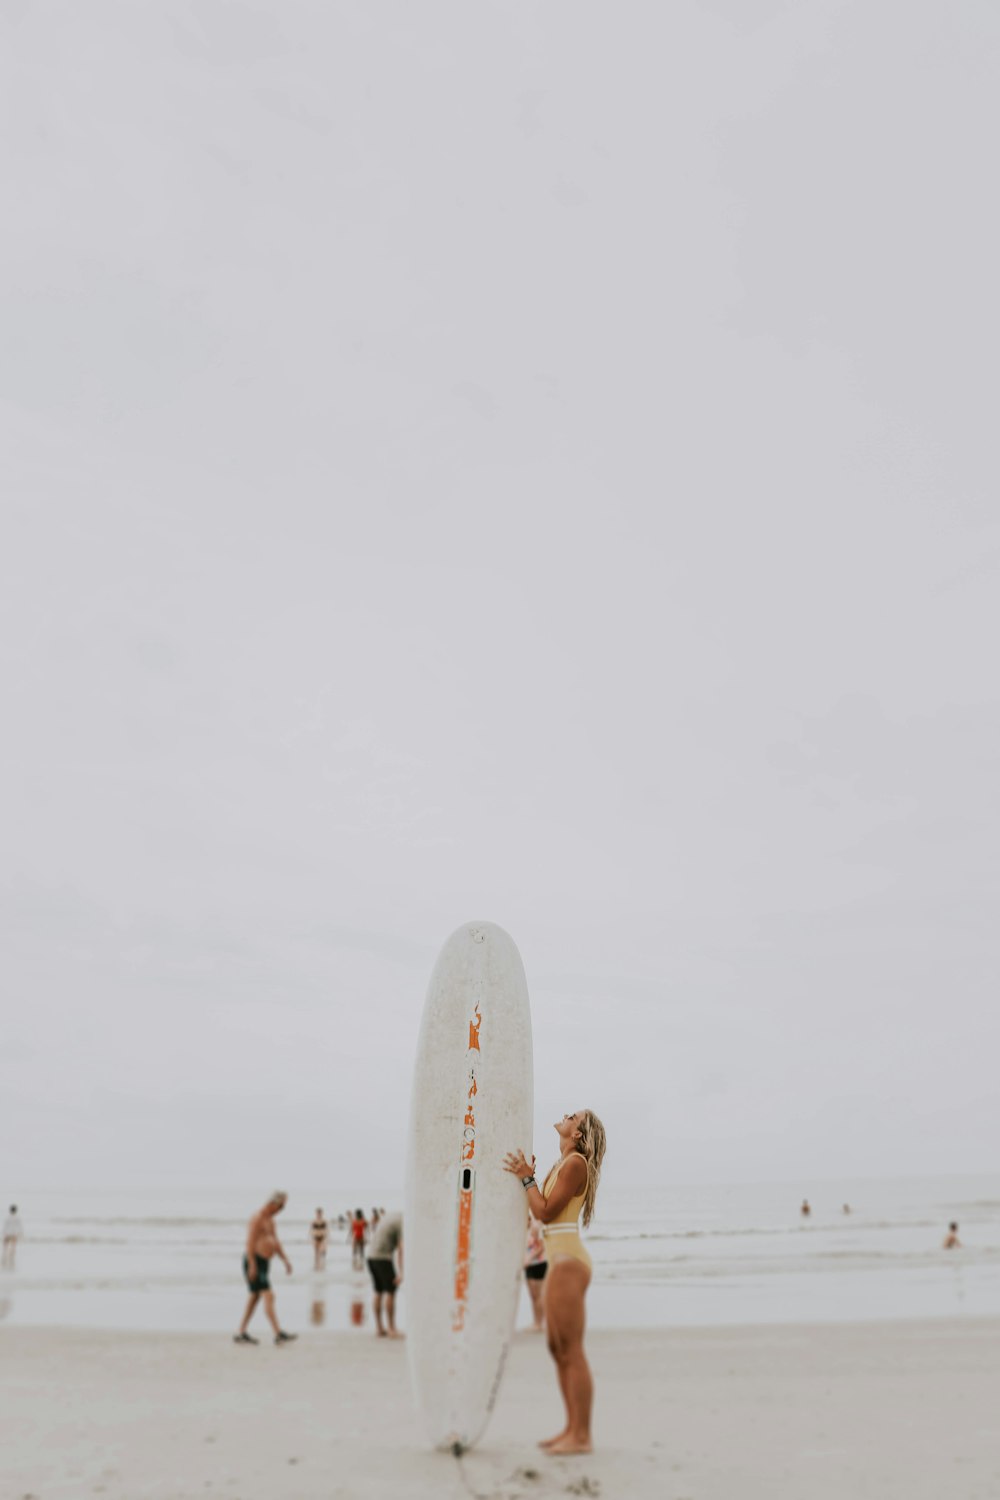 woman standing and holding surfboard near seashore